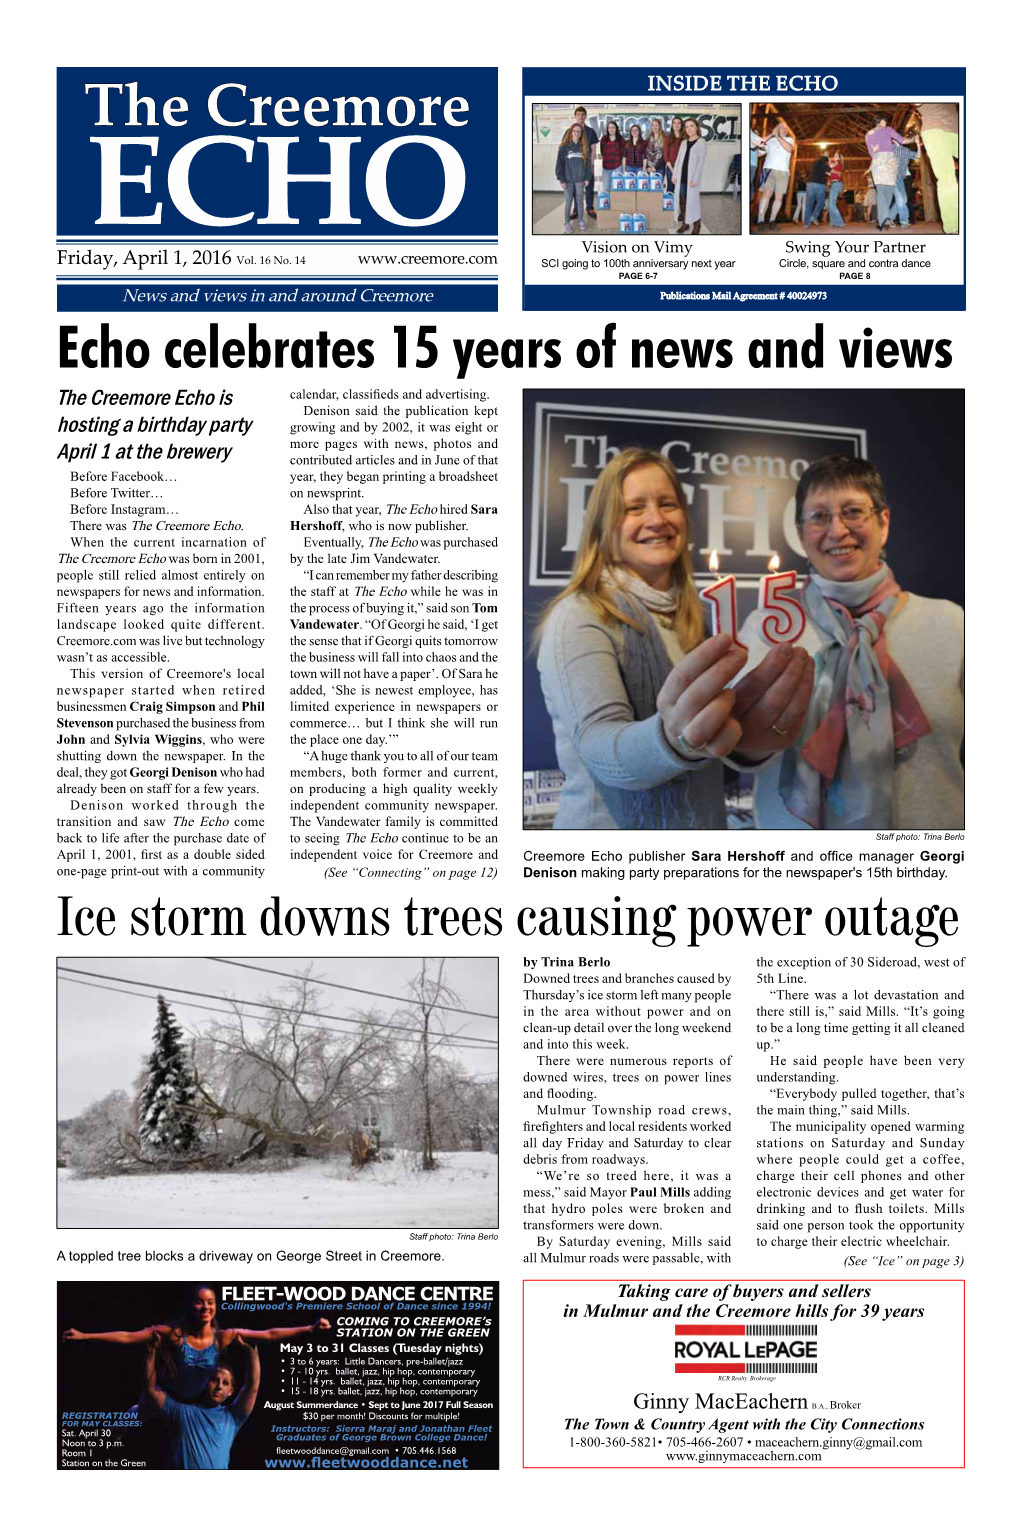 The Creemore Echo Is Calendar, Classifieds and Advertising